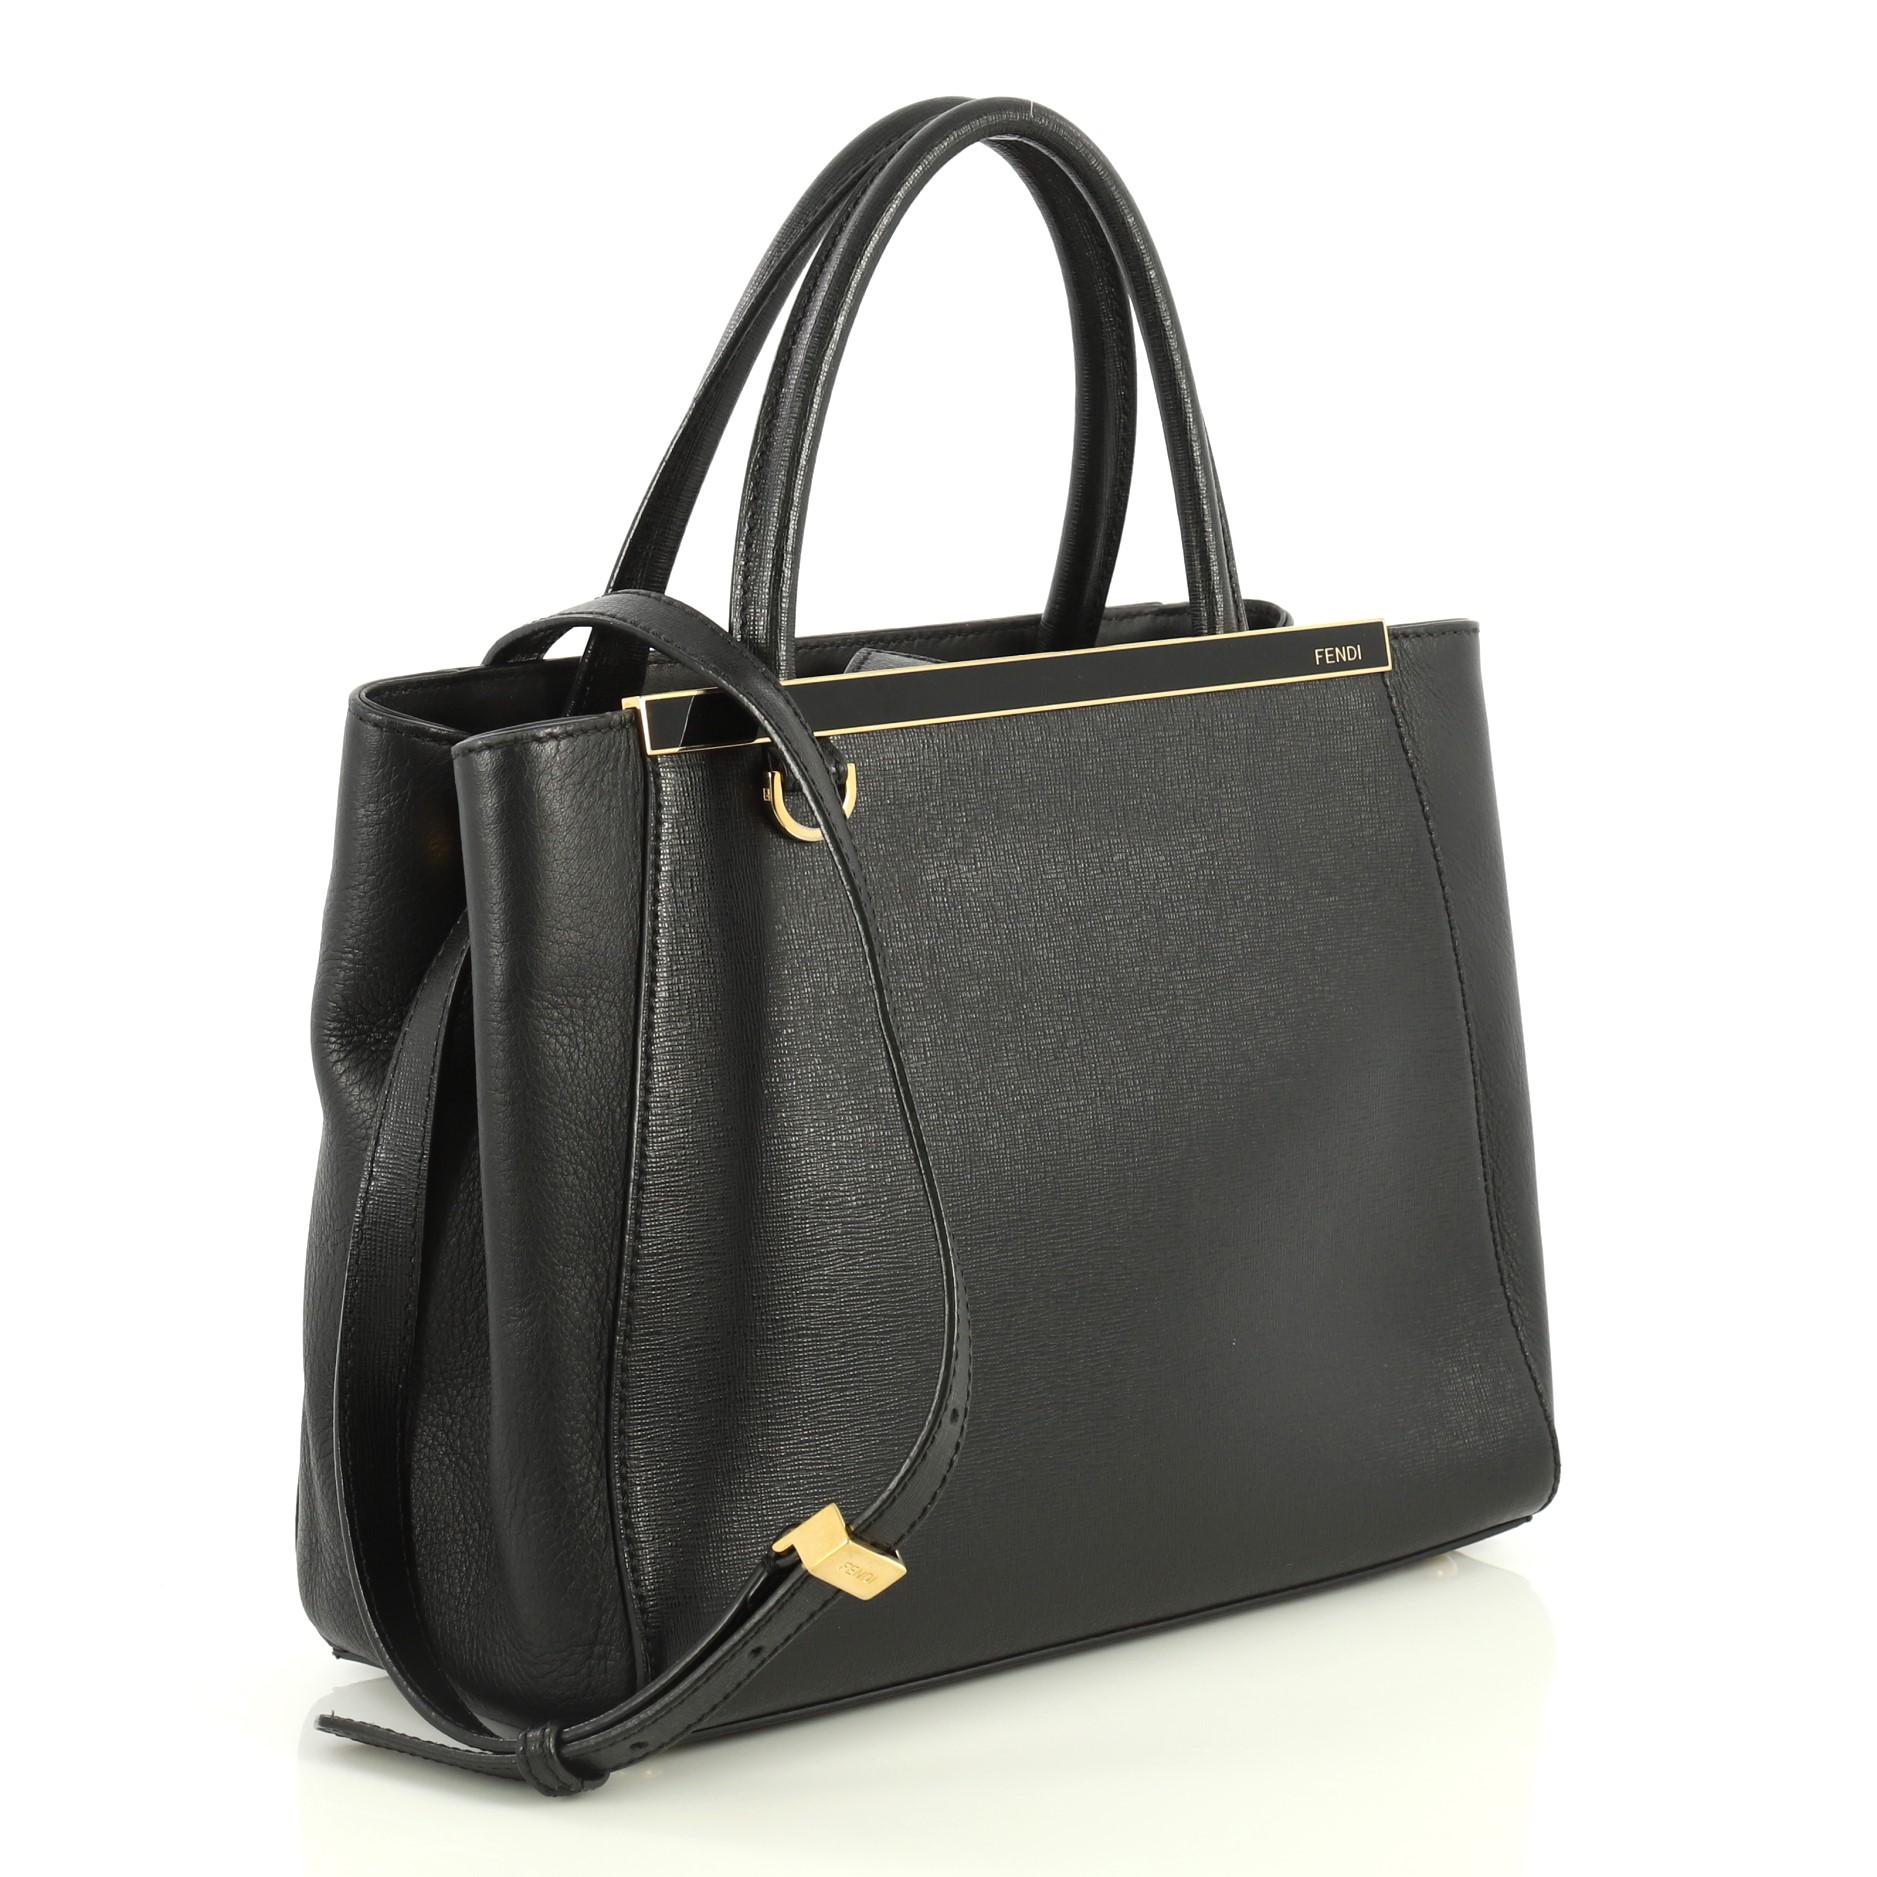 This Fendi 2Jours Bag Leather Petite, crafted from black leather, features dual rolled leather handles, top bar with Fendi brand name, and gold-tone hardware. Its top snap tab closure opens to a black fabric interior with a middle zip compartment.